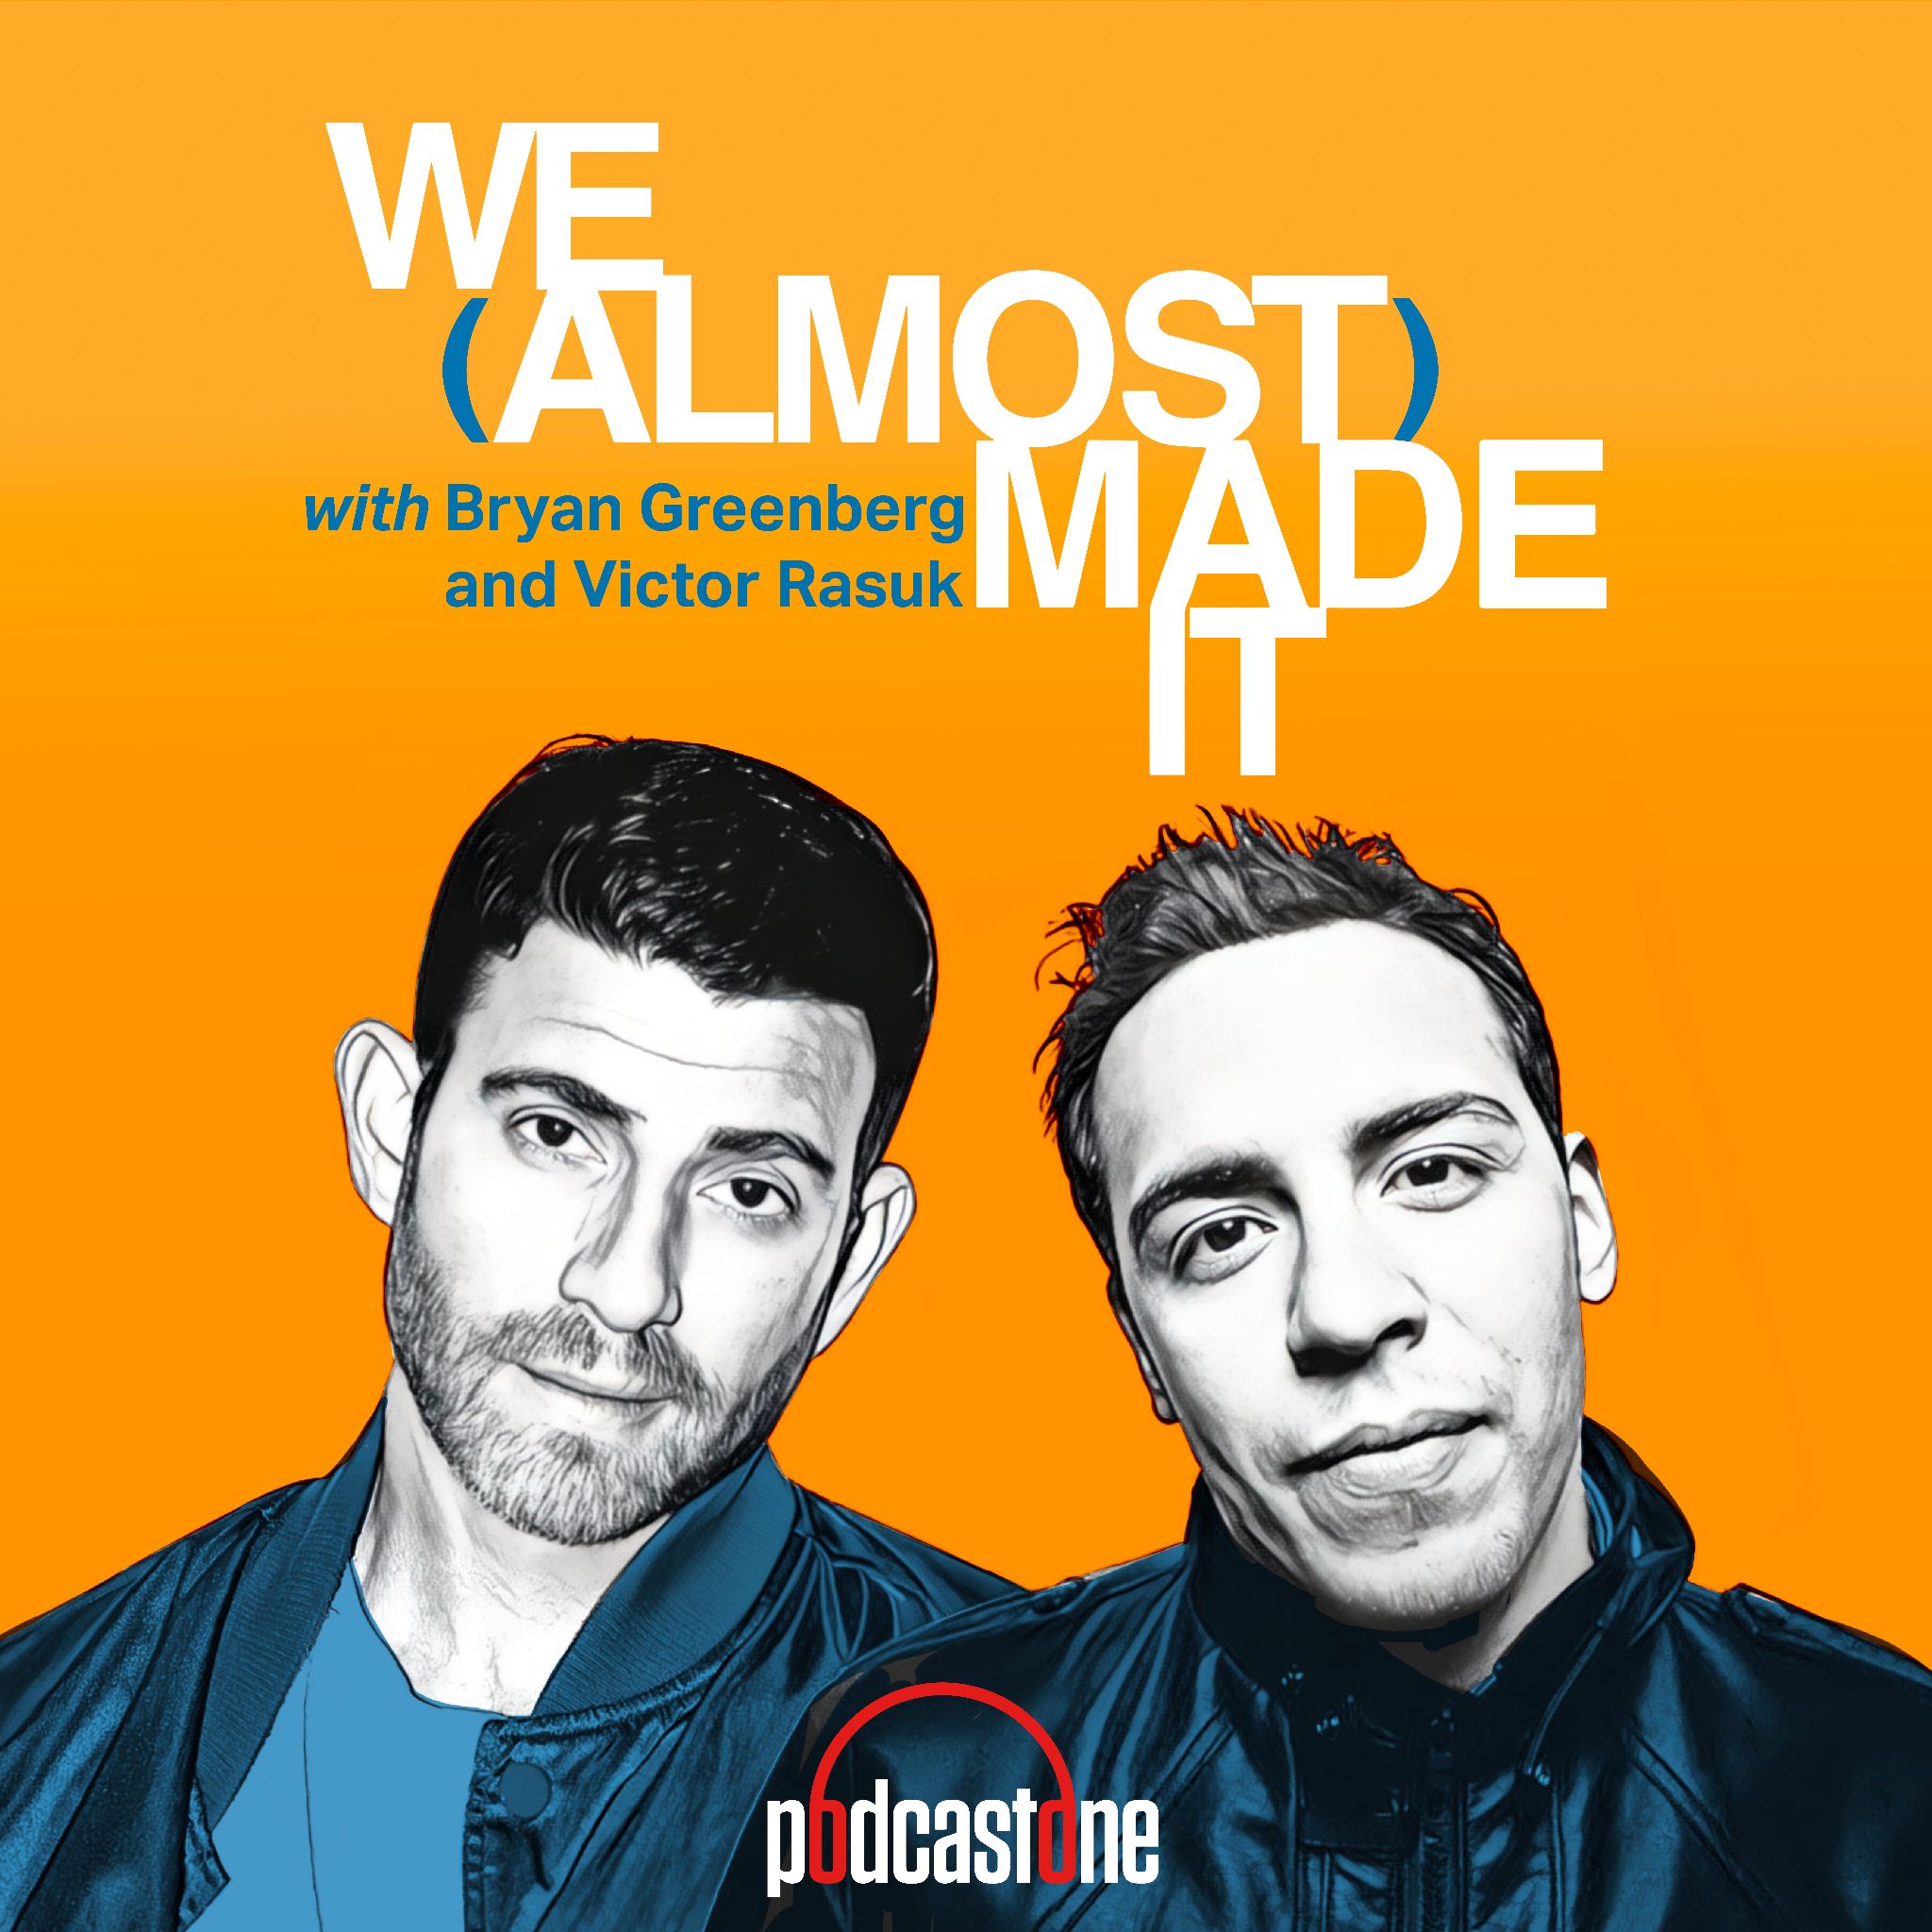 We (Almost) Made It with Bryan Greenberg and Victor Rasuk